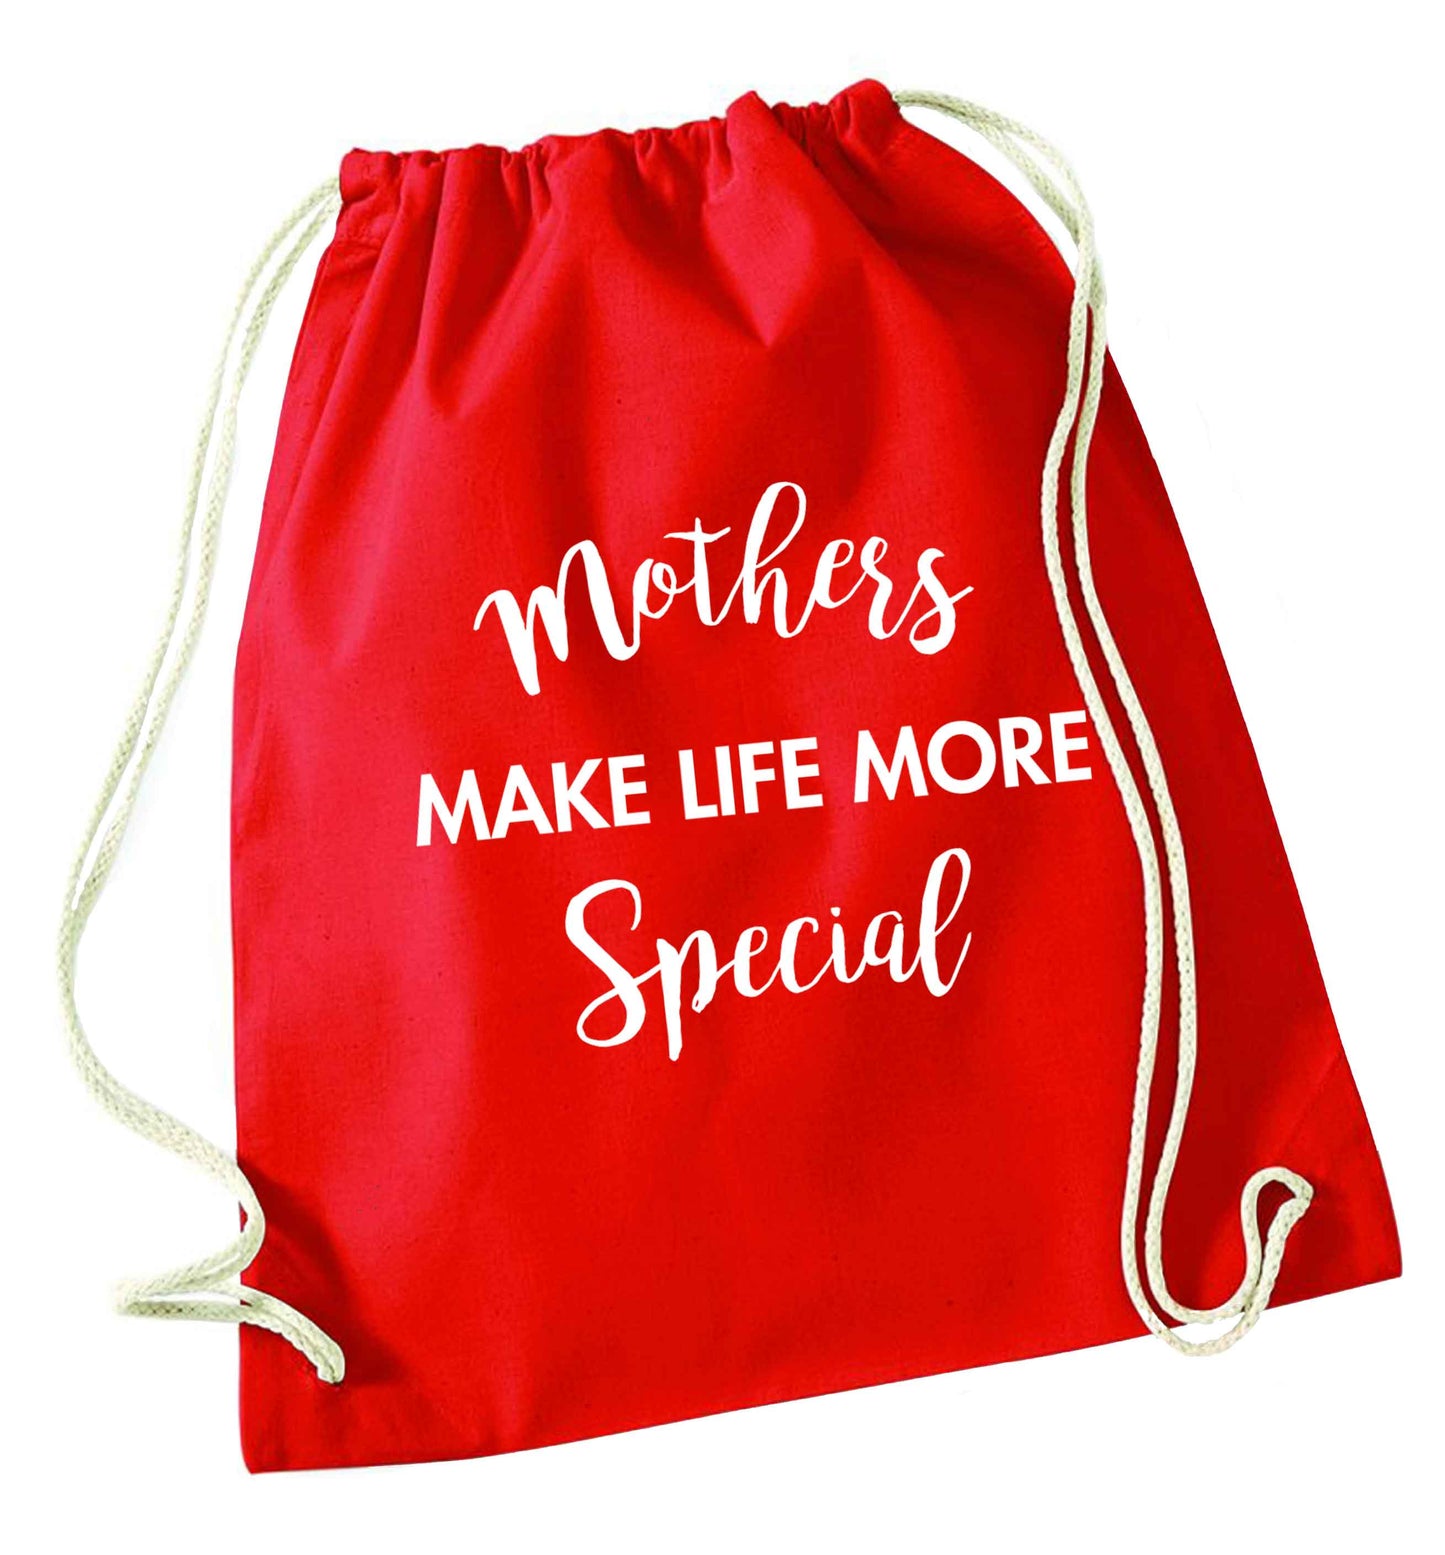 Mother's make life more special red drawstring bag 